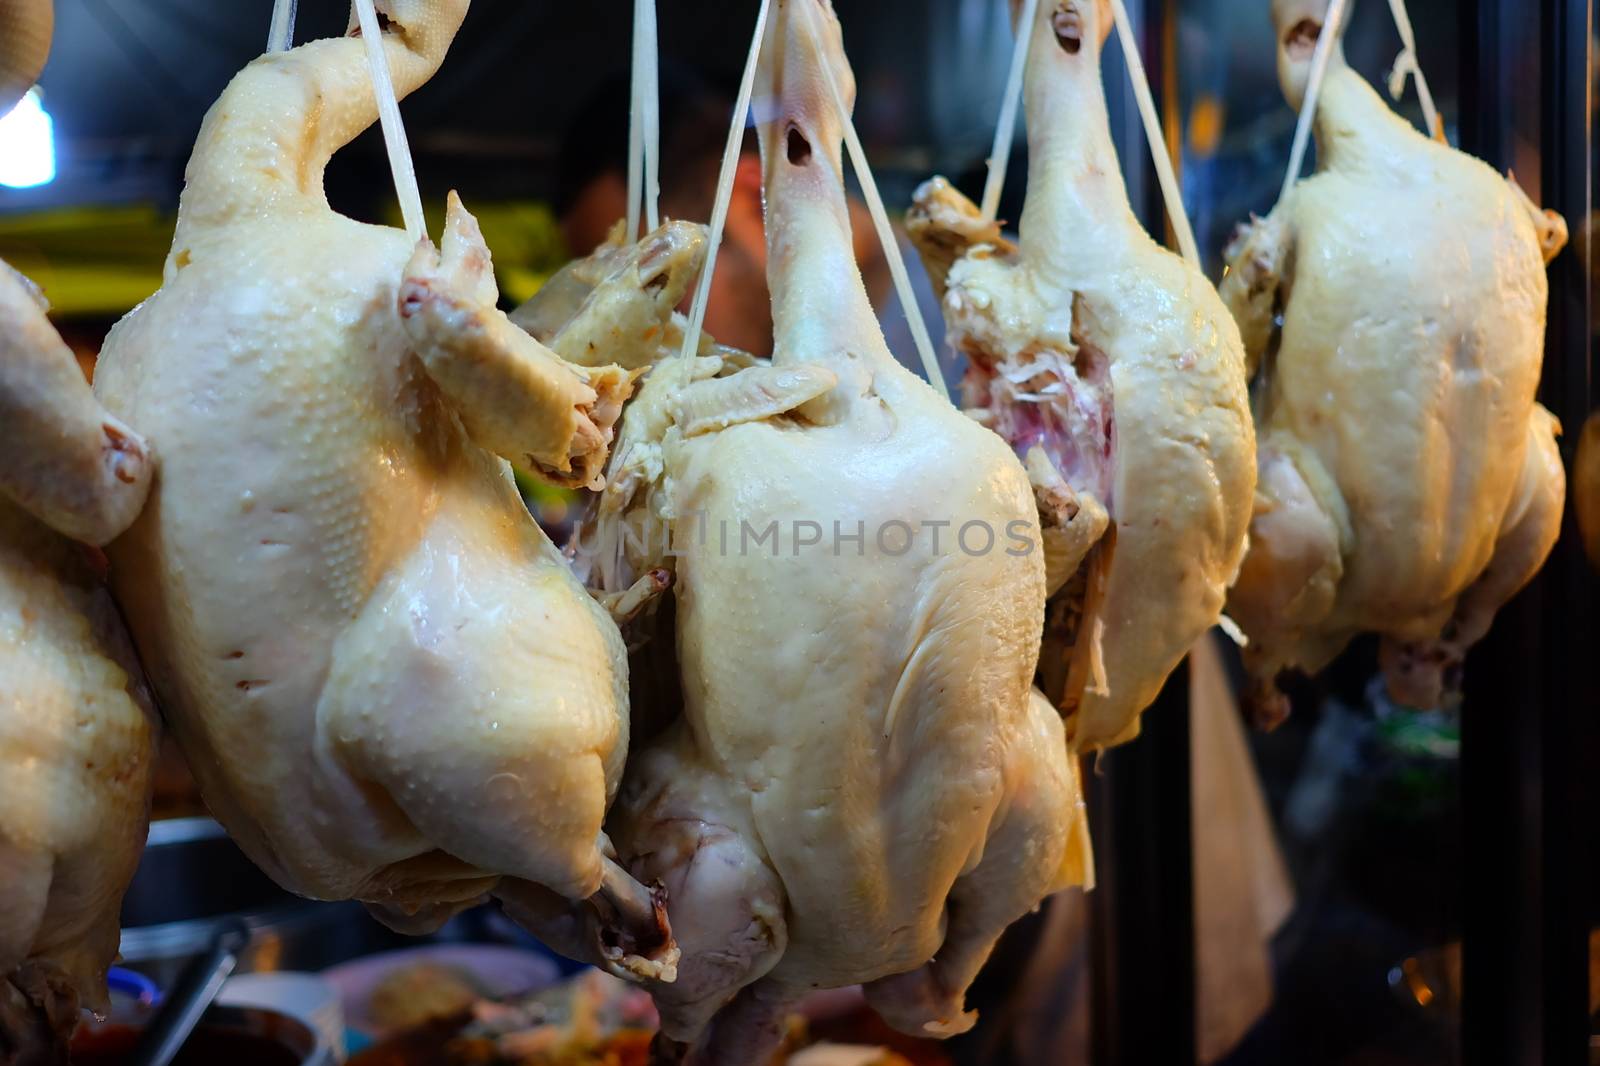 Close-up Hanging Boiled Chickens Display for Hainanese Chicken Rice Recipe.